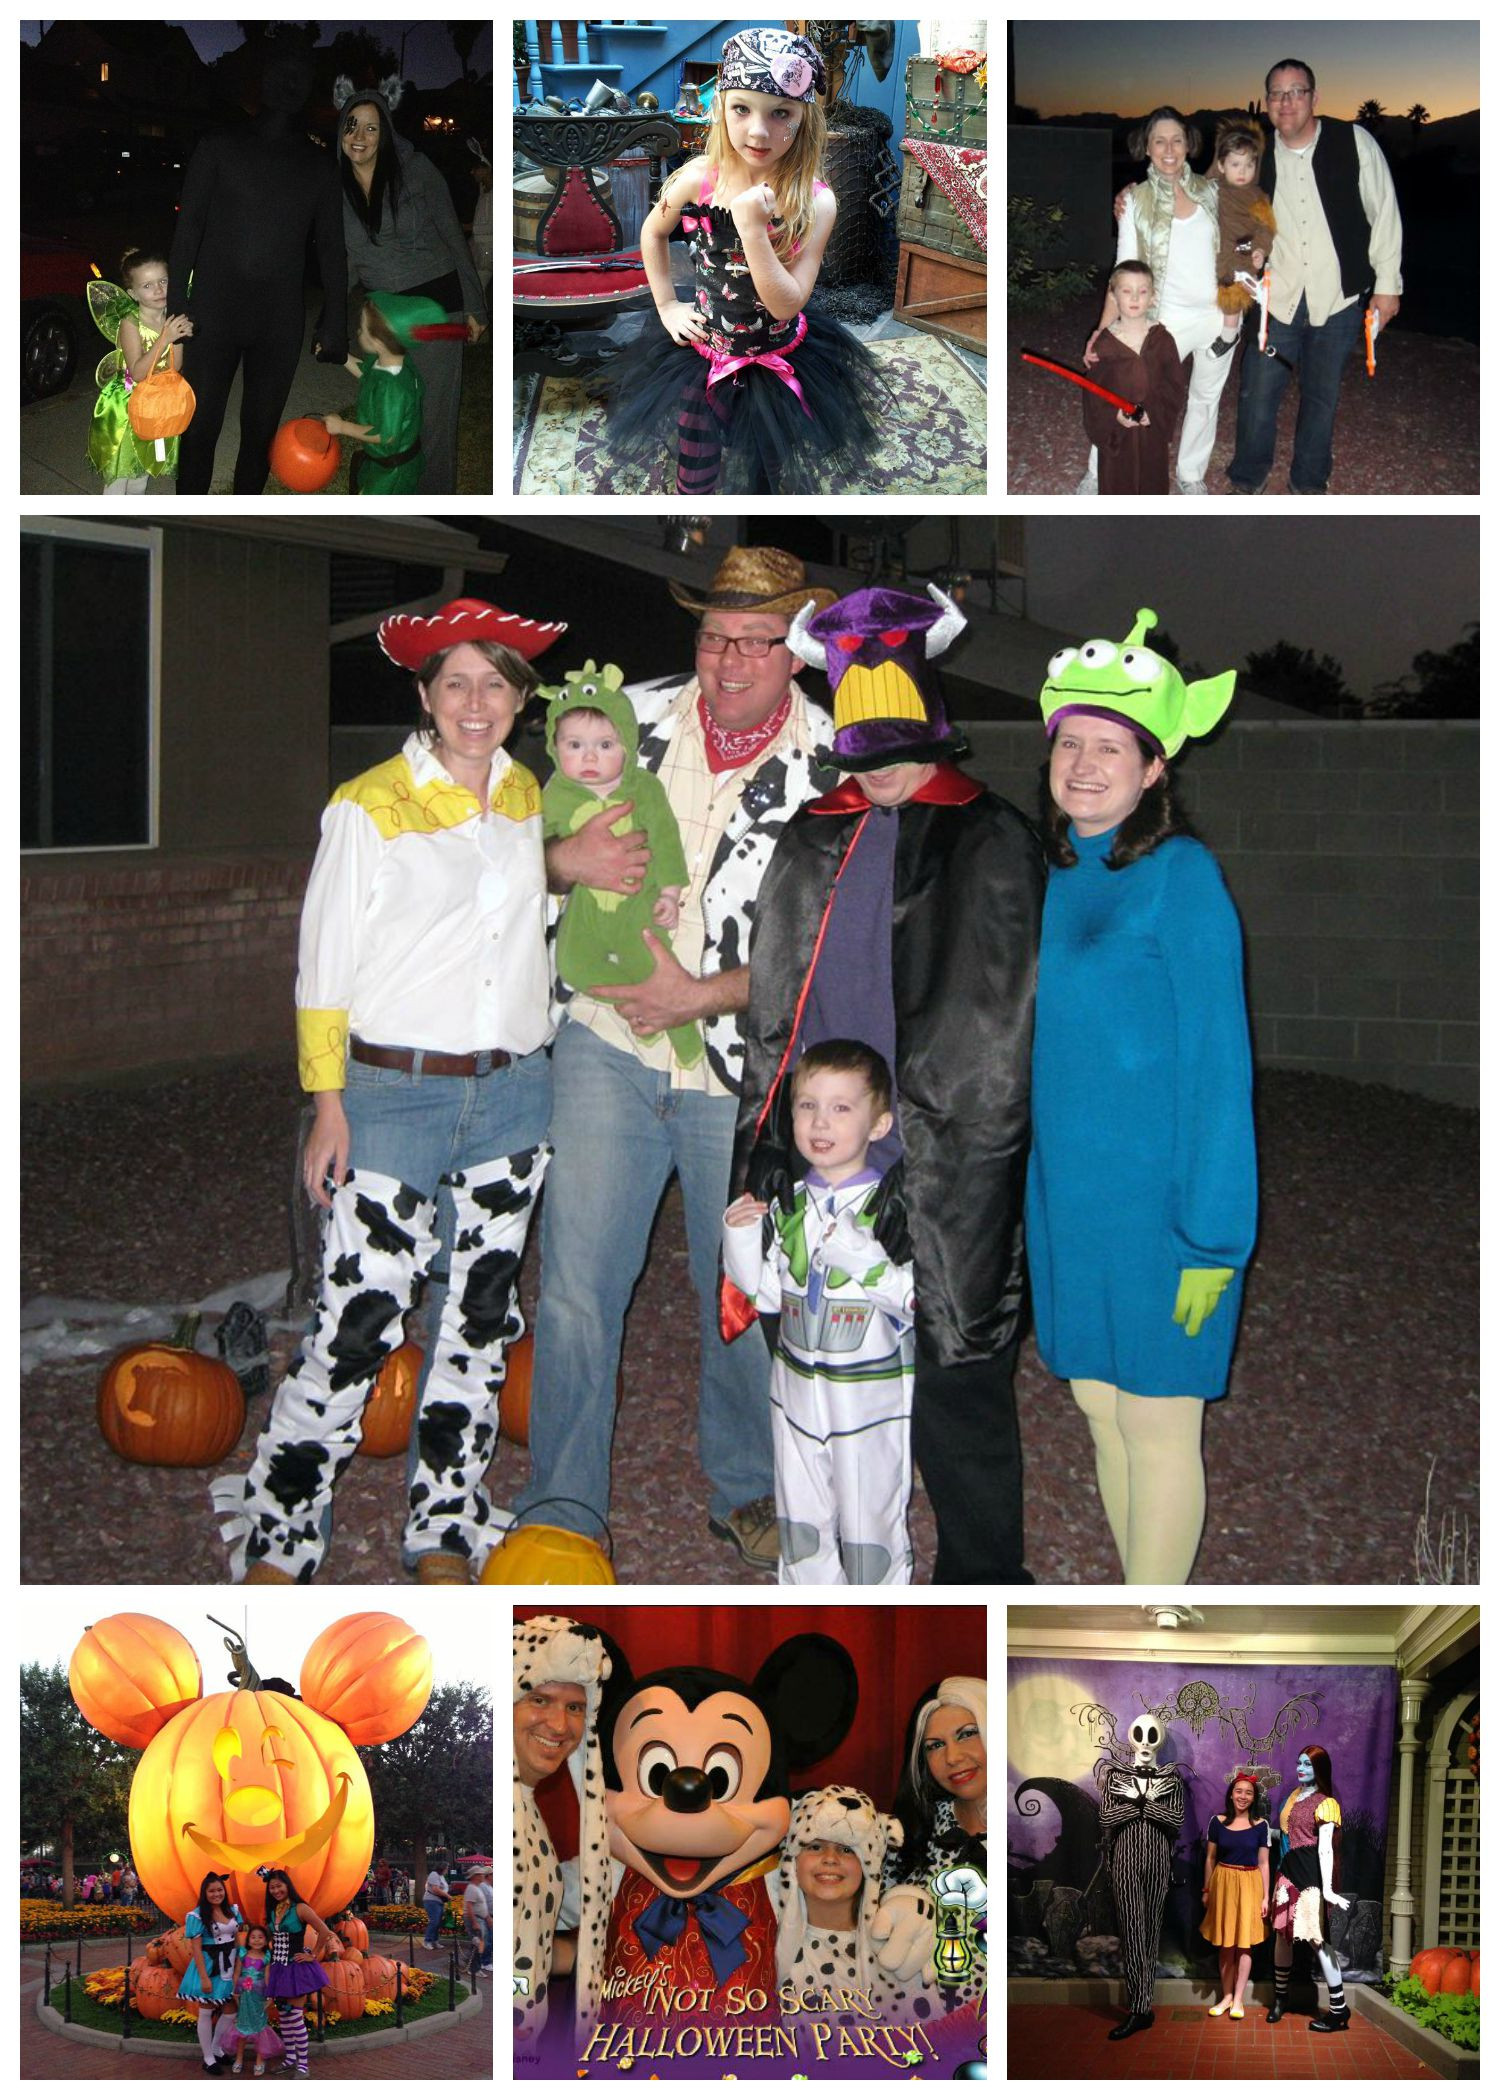 Mickey Not So Scary Halloween Party Costume Ideas
 Mickey s not so scary Halloween Party